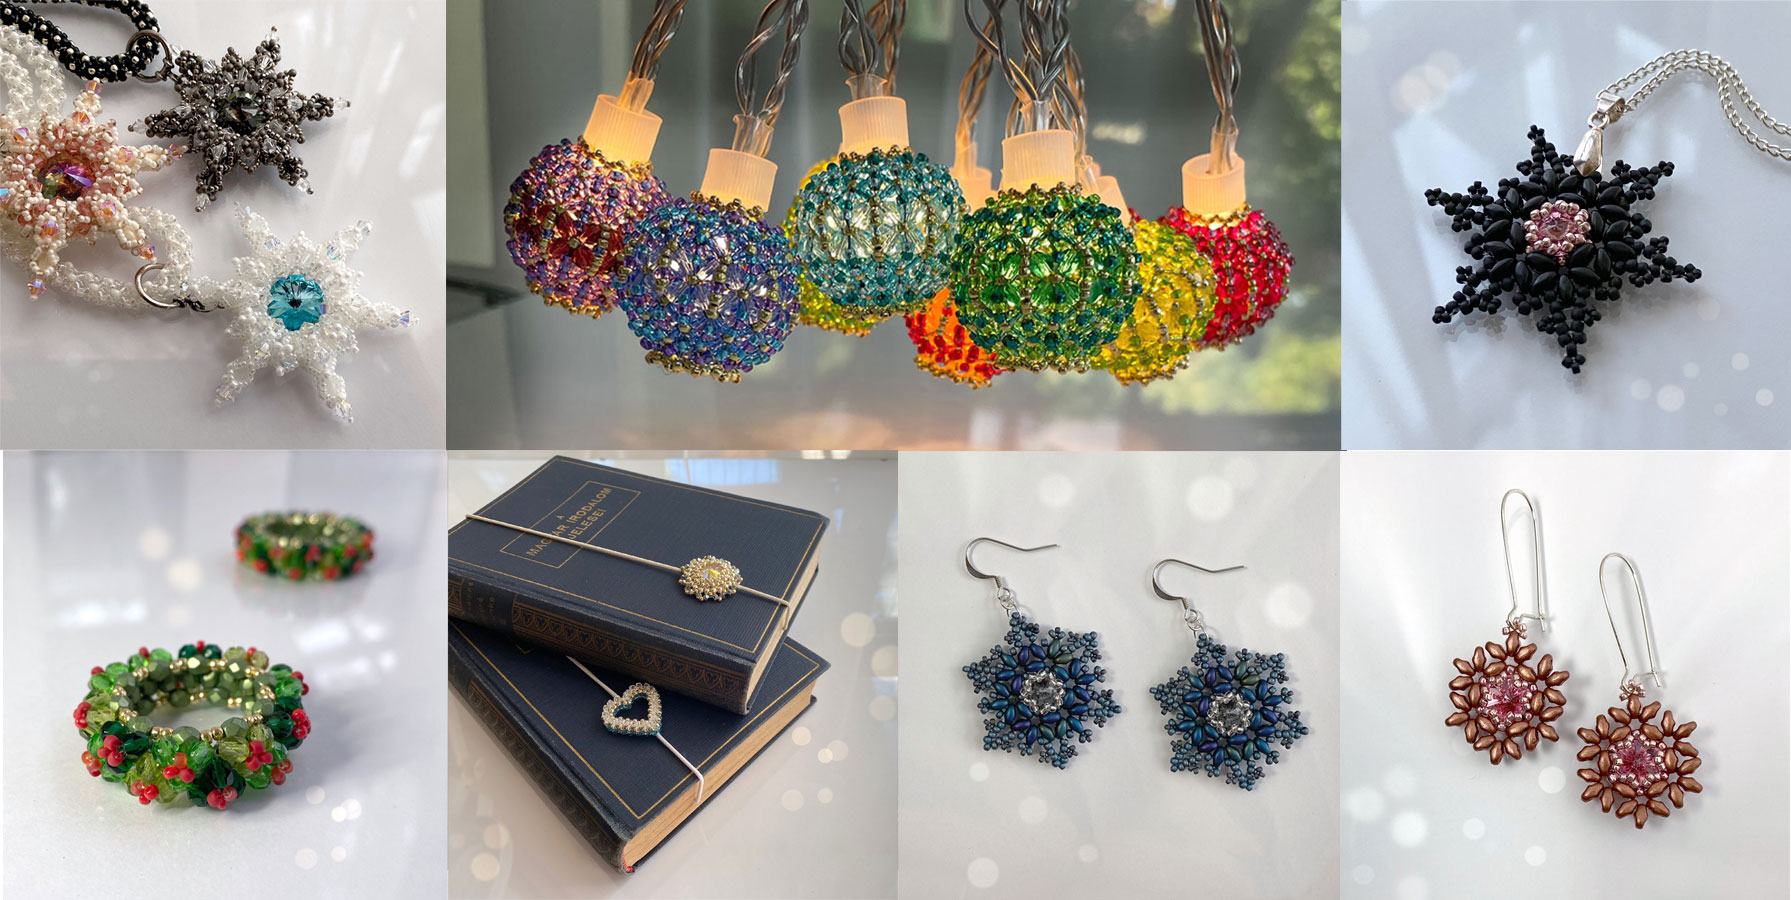 Beading tutorials for Christmas by Diana Balogh